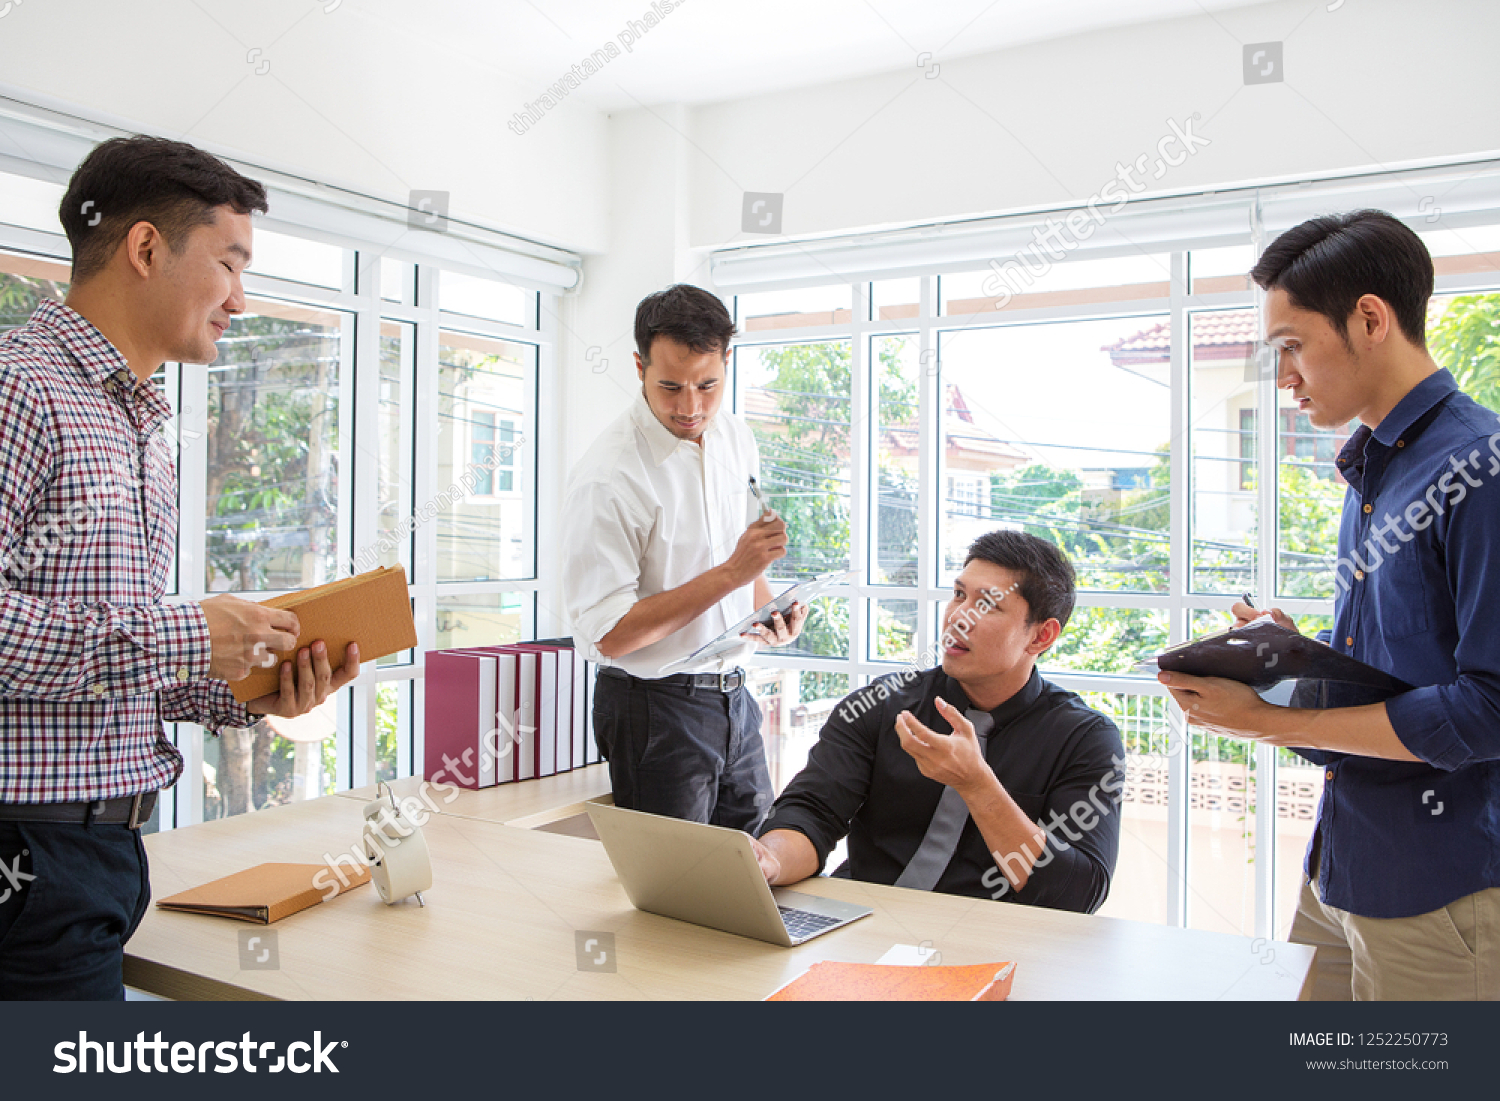 Businessman plaining data at meeting room. Business people meeting around desk. Asian people. Young business man. Asian people. #1252250773